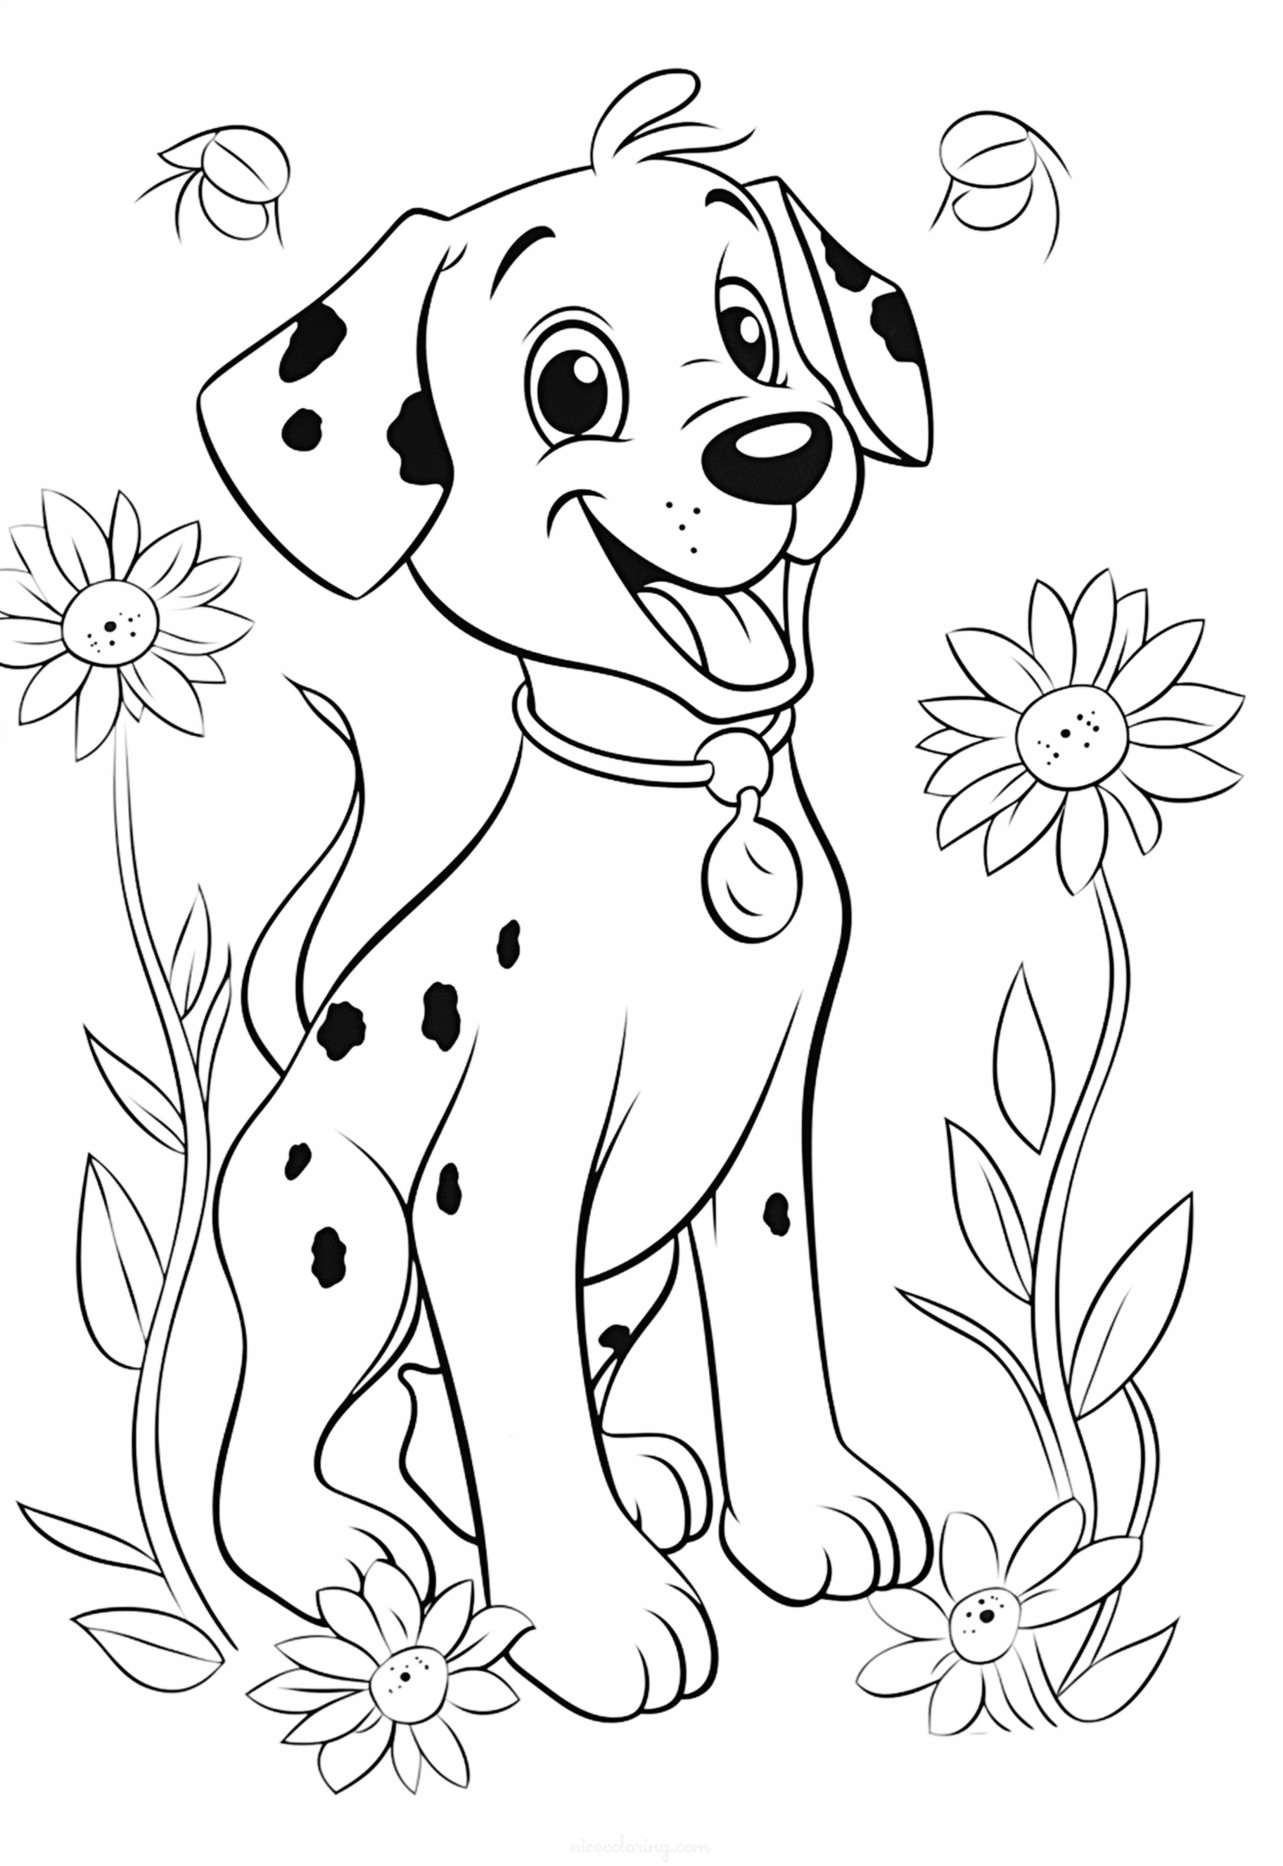 Dog playing with a ball coloring page